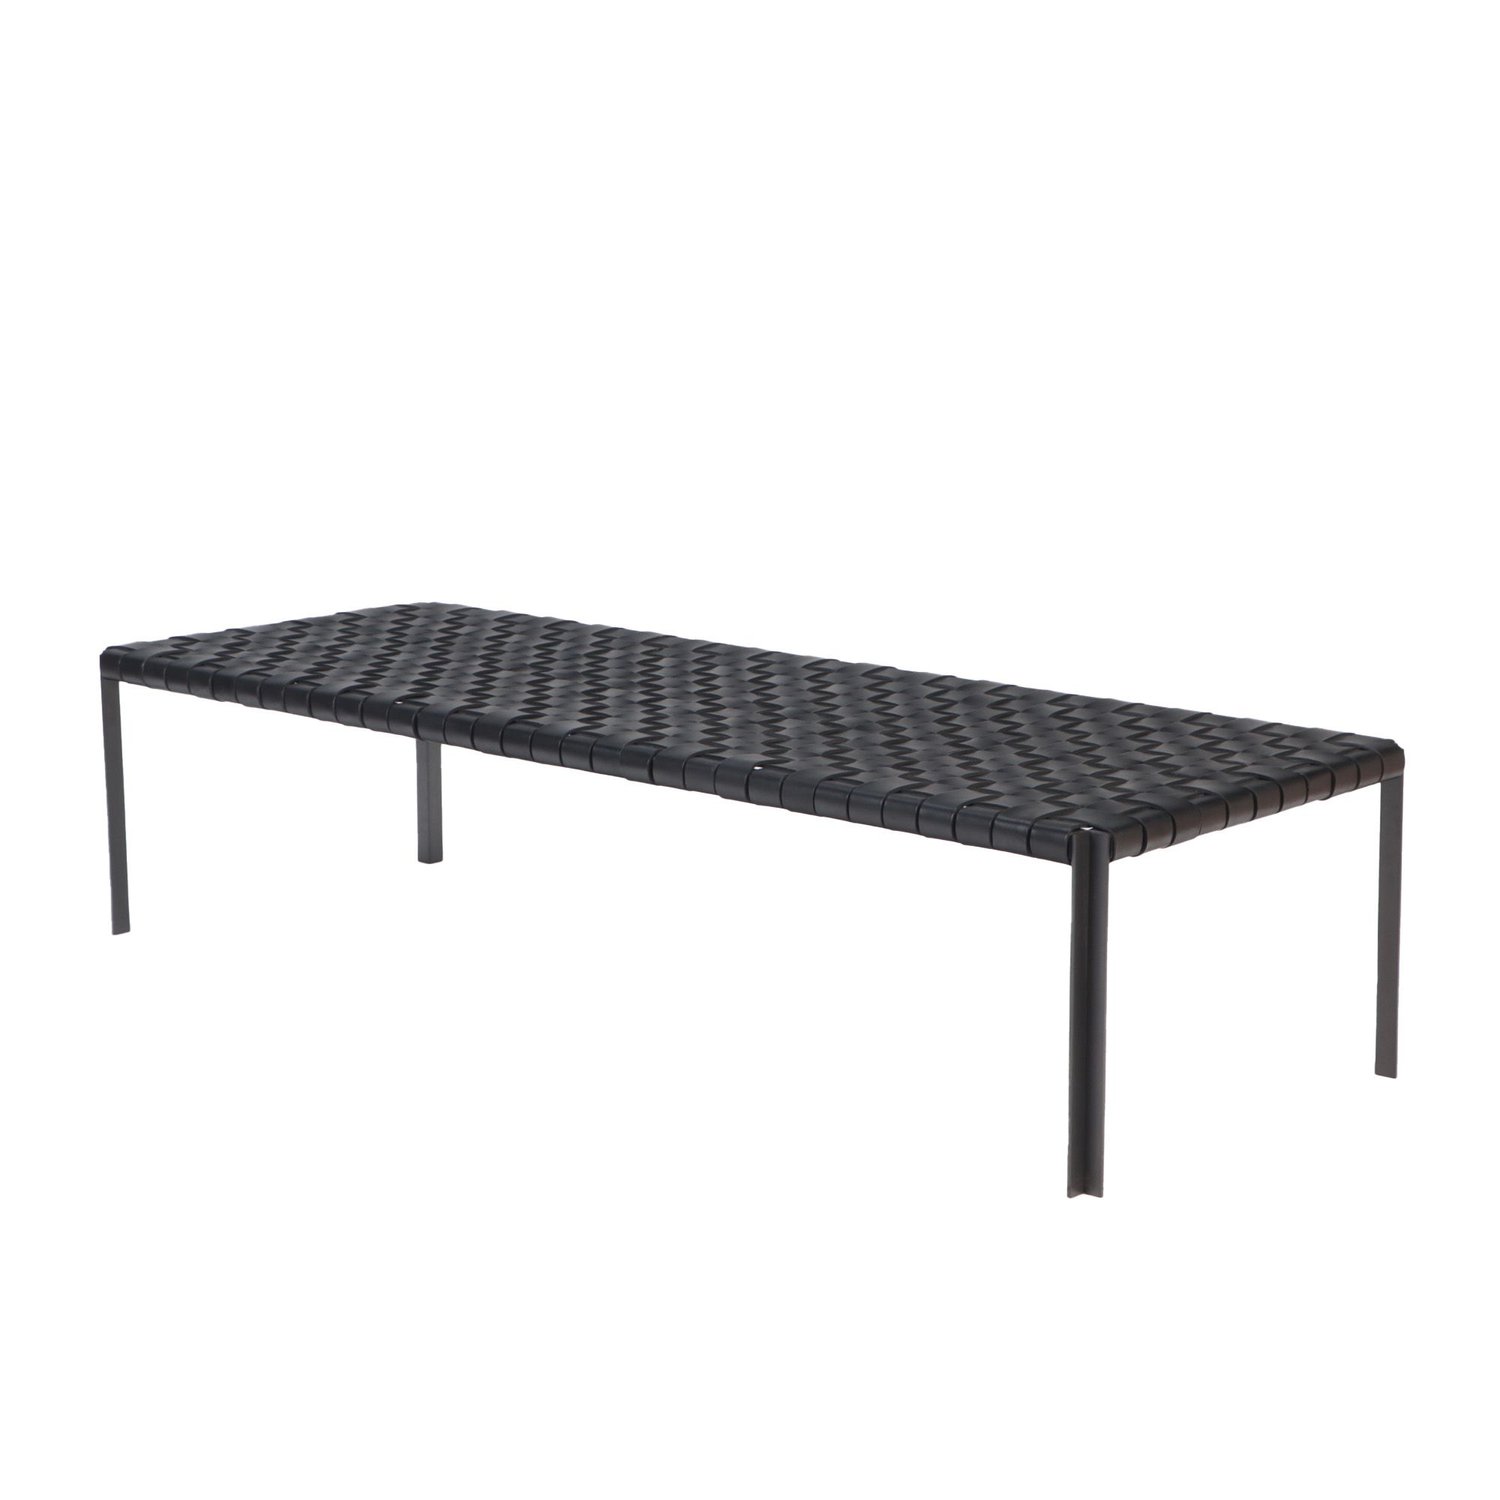 Bench — Industries Gratz on Long Woven Blackened Leather in Frame Black TG-18 Leather